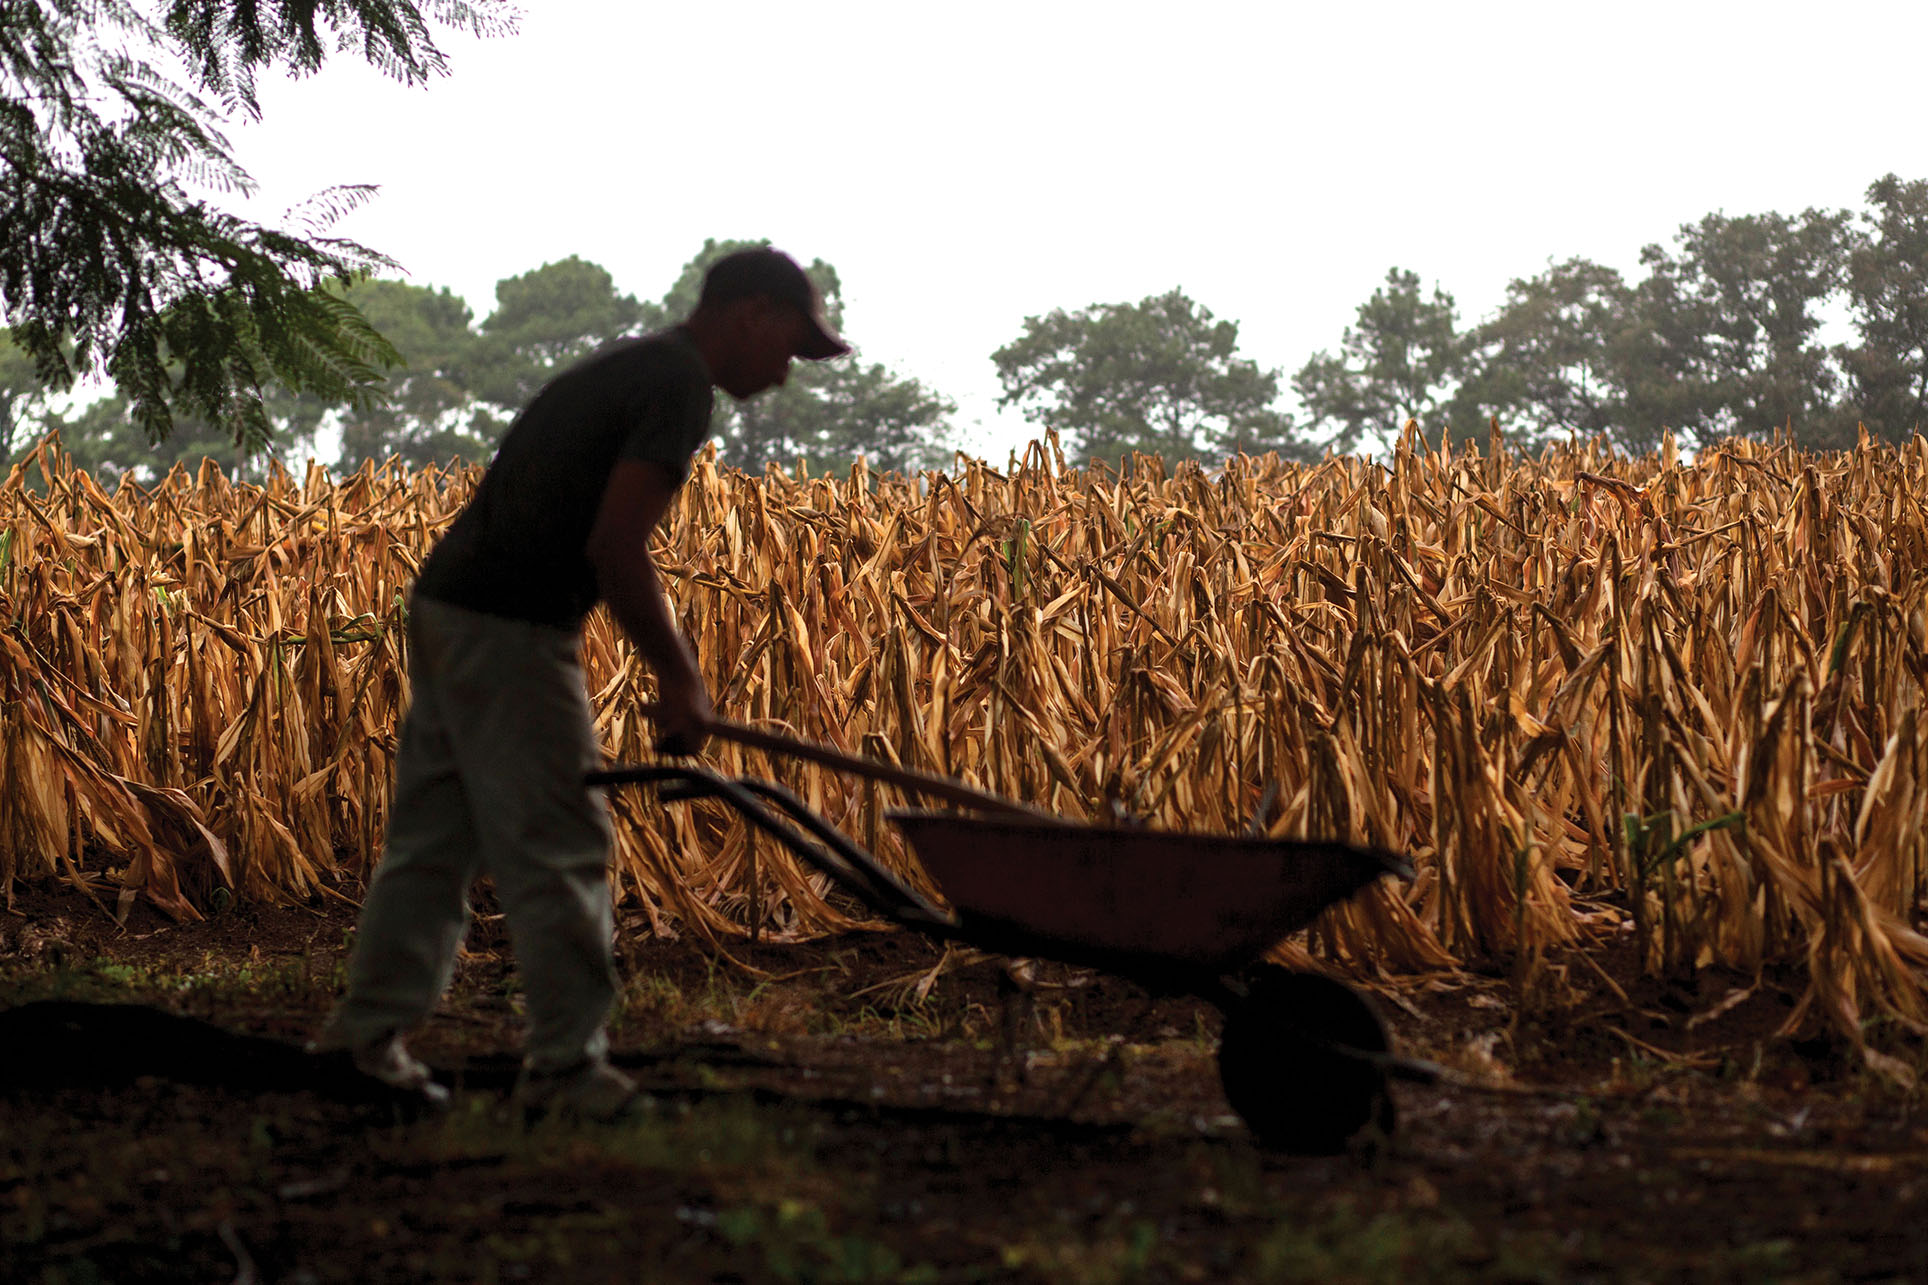 A farmer works among the dried out and dying stalks in his drought-stricken cornfield in Guatemala. (Photo courtesy of Conred/Guatemala.)